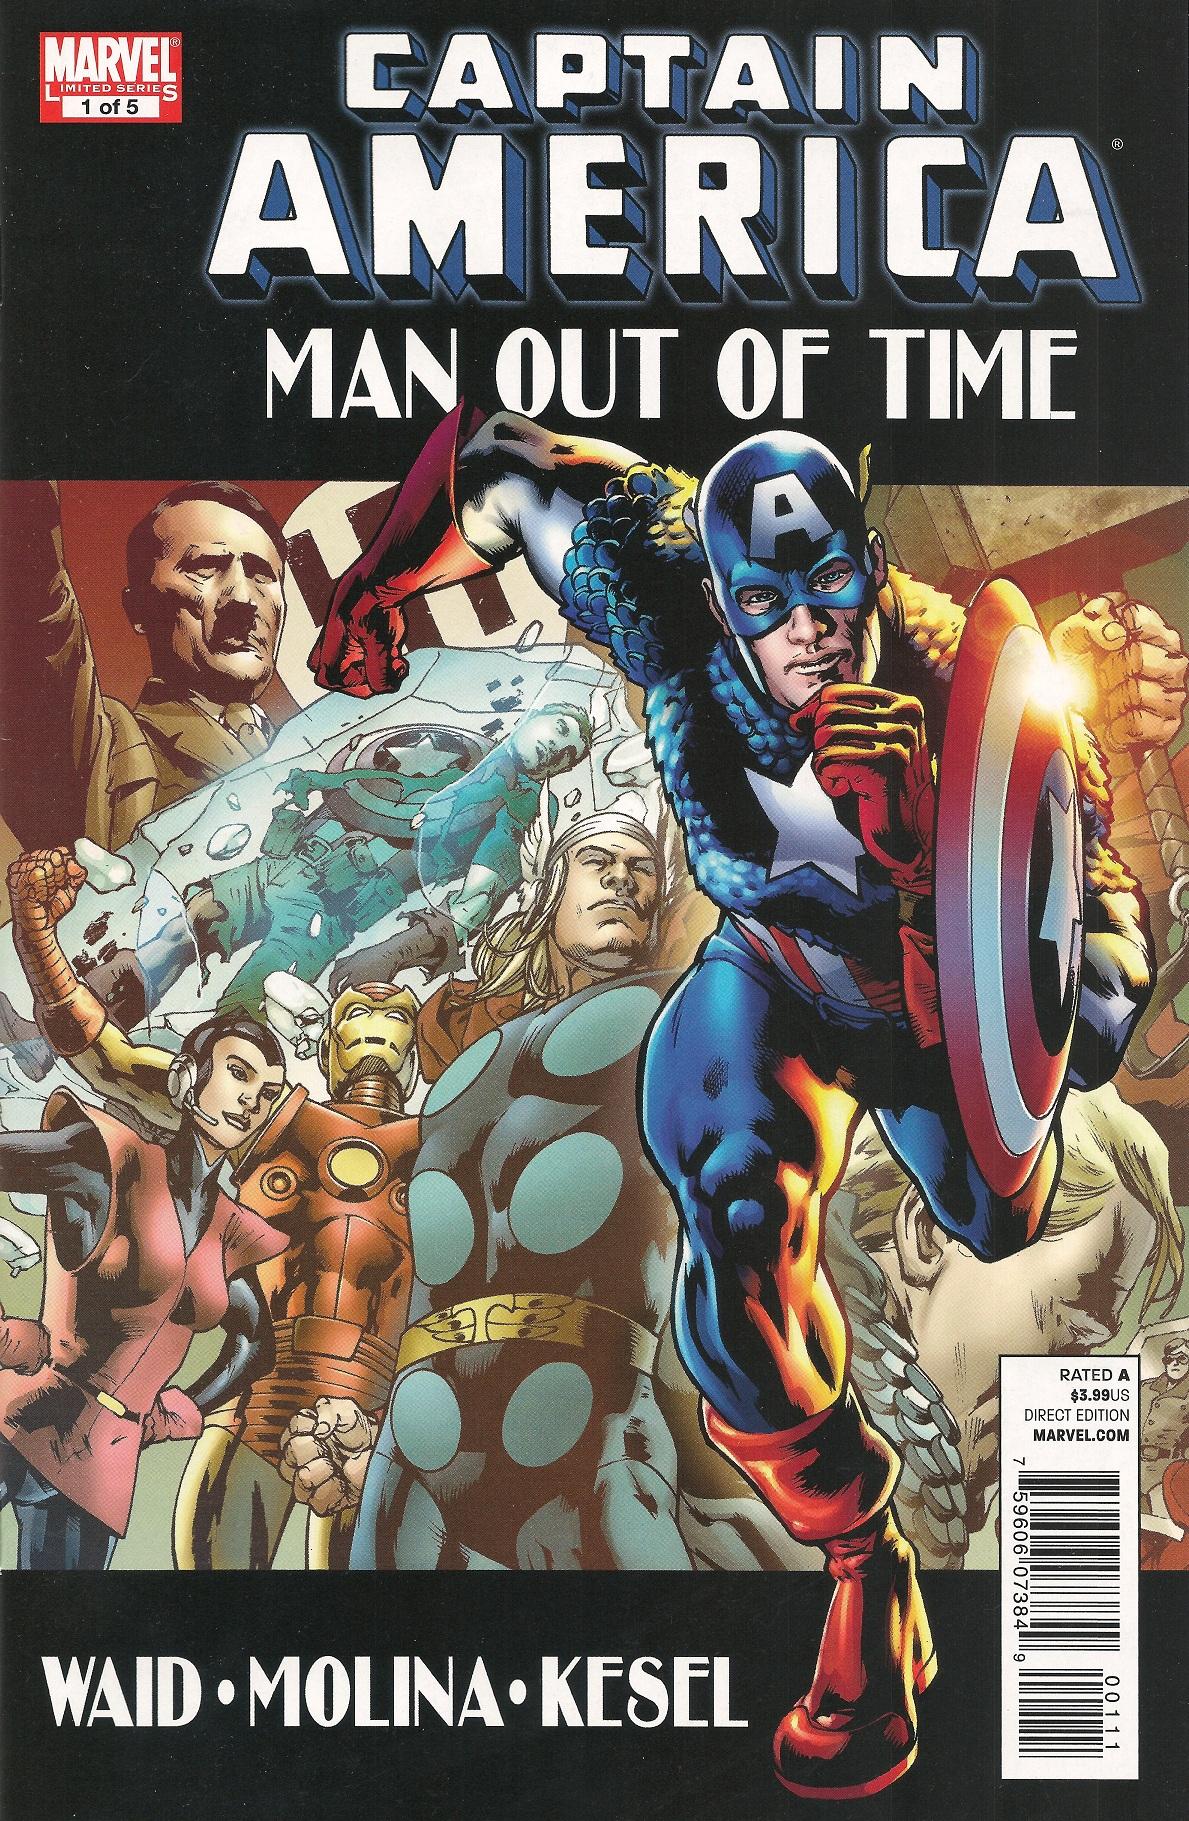 Captain America: Man Out of Time Vol. 1 #1